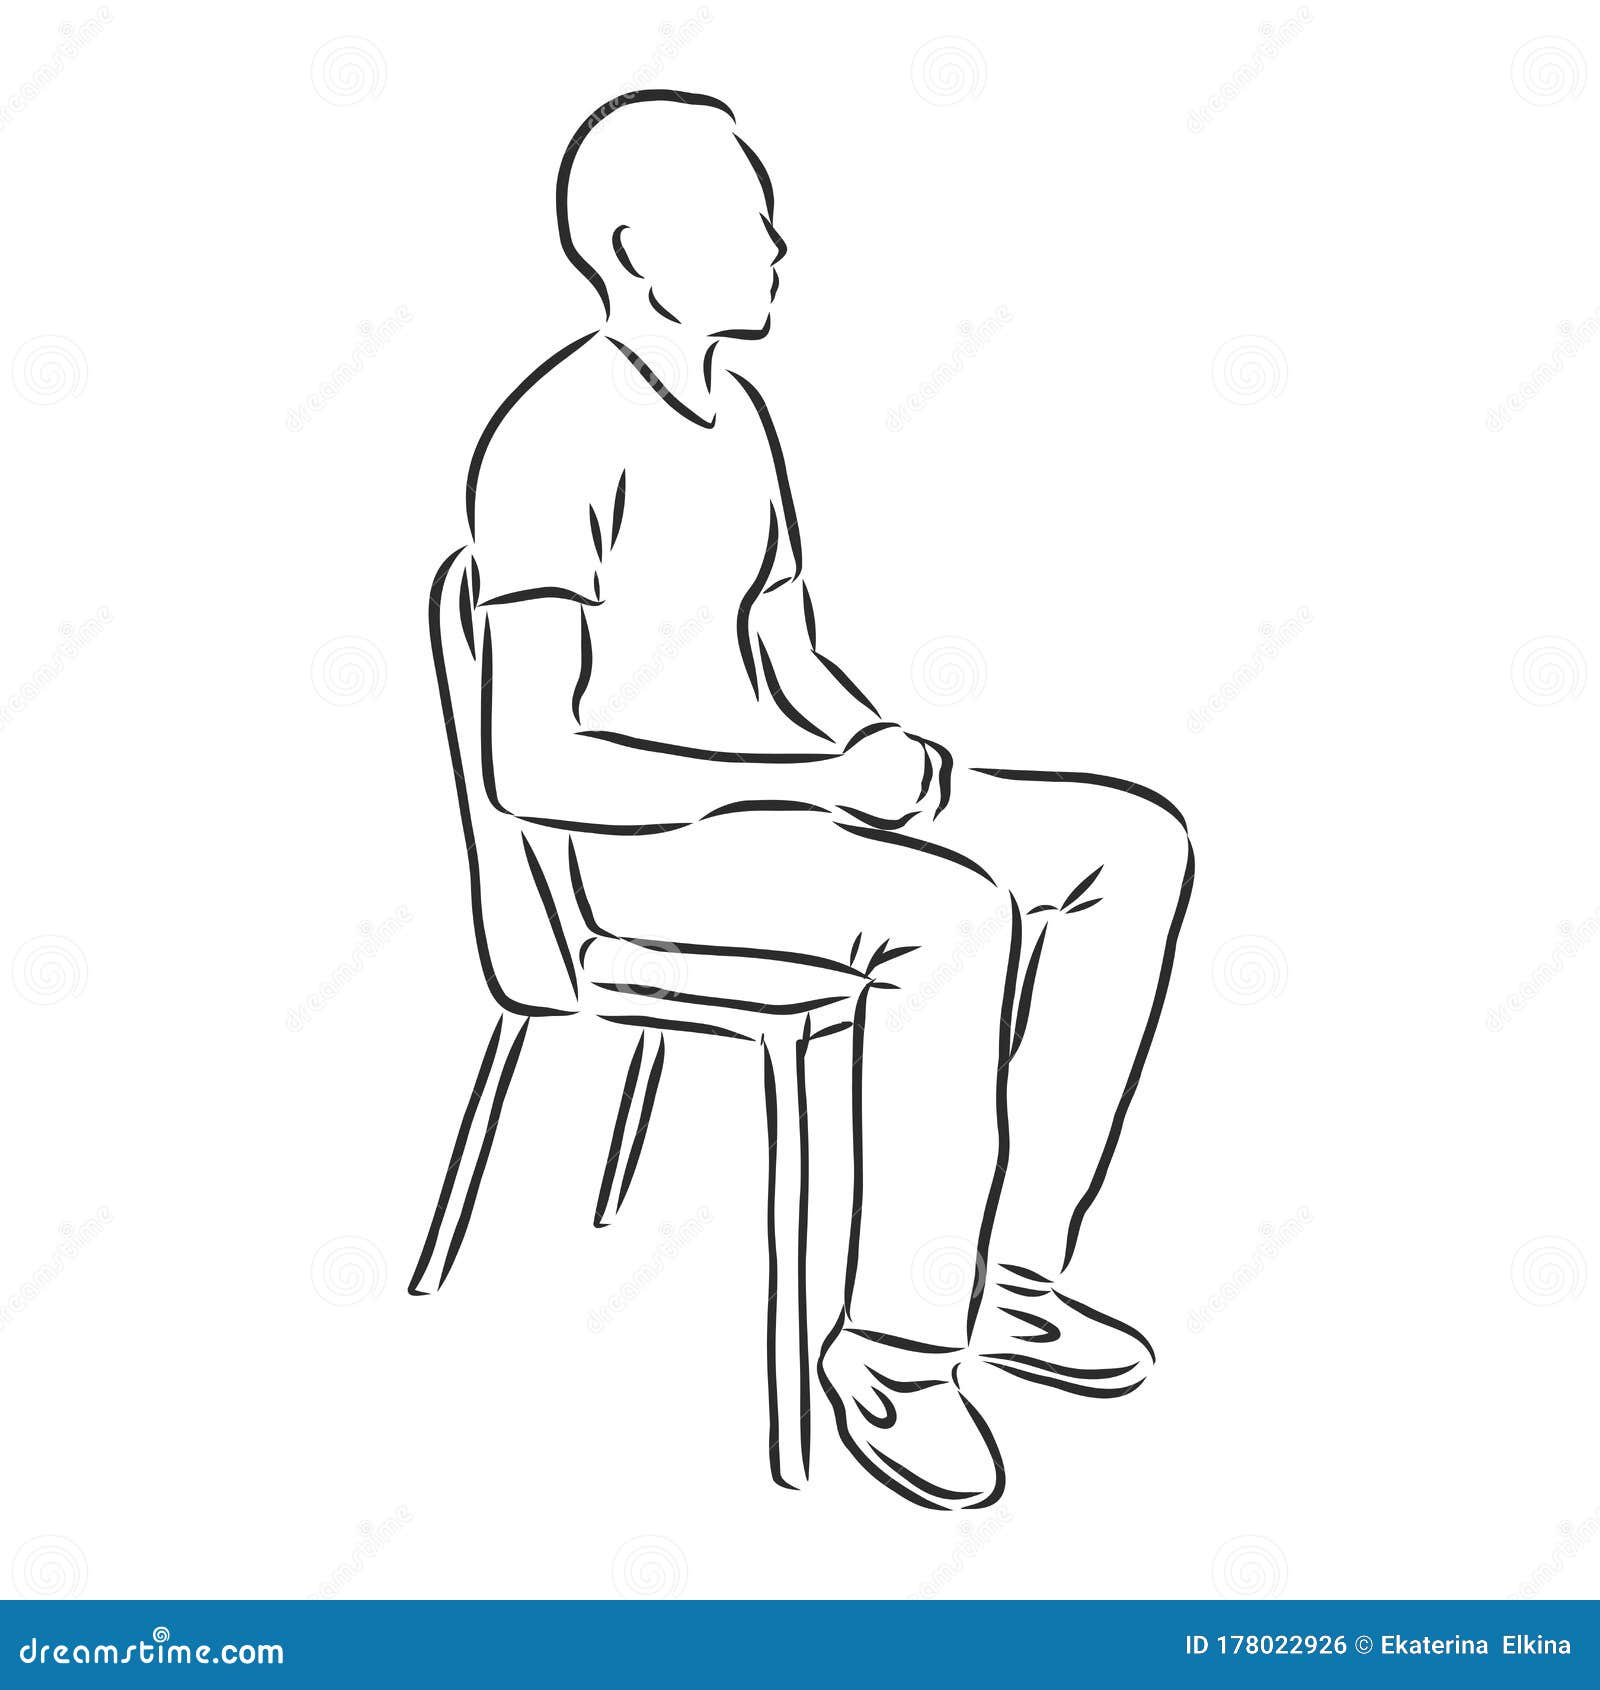 Man Sitting on a Chair Vector Sketch Illustration Stock Vector   Illustration of person like 178022926